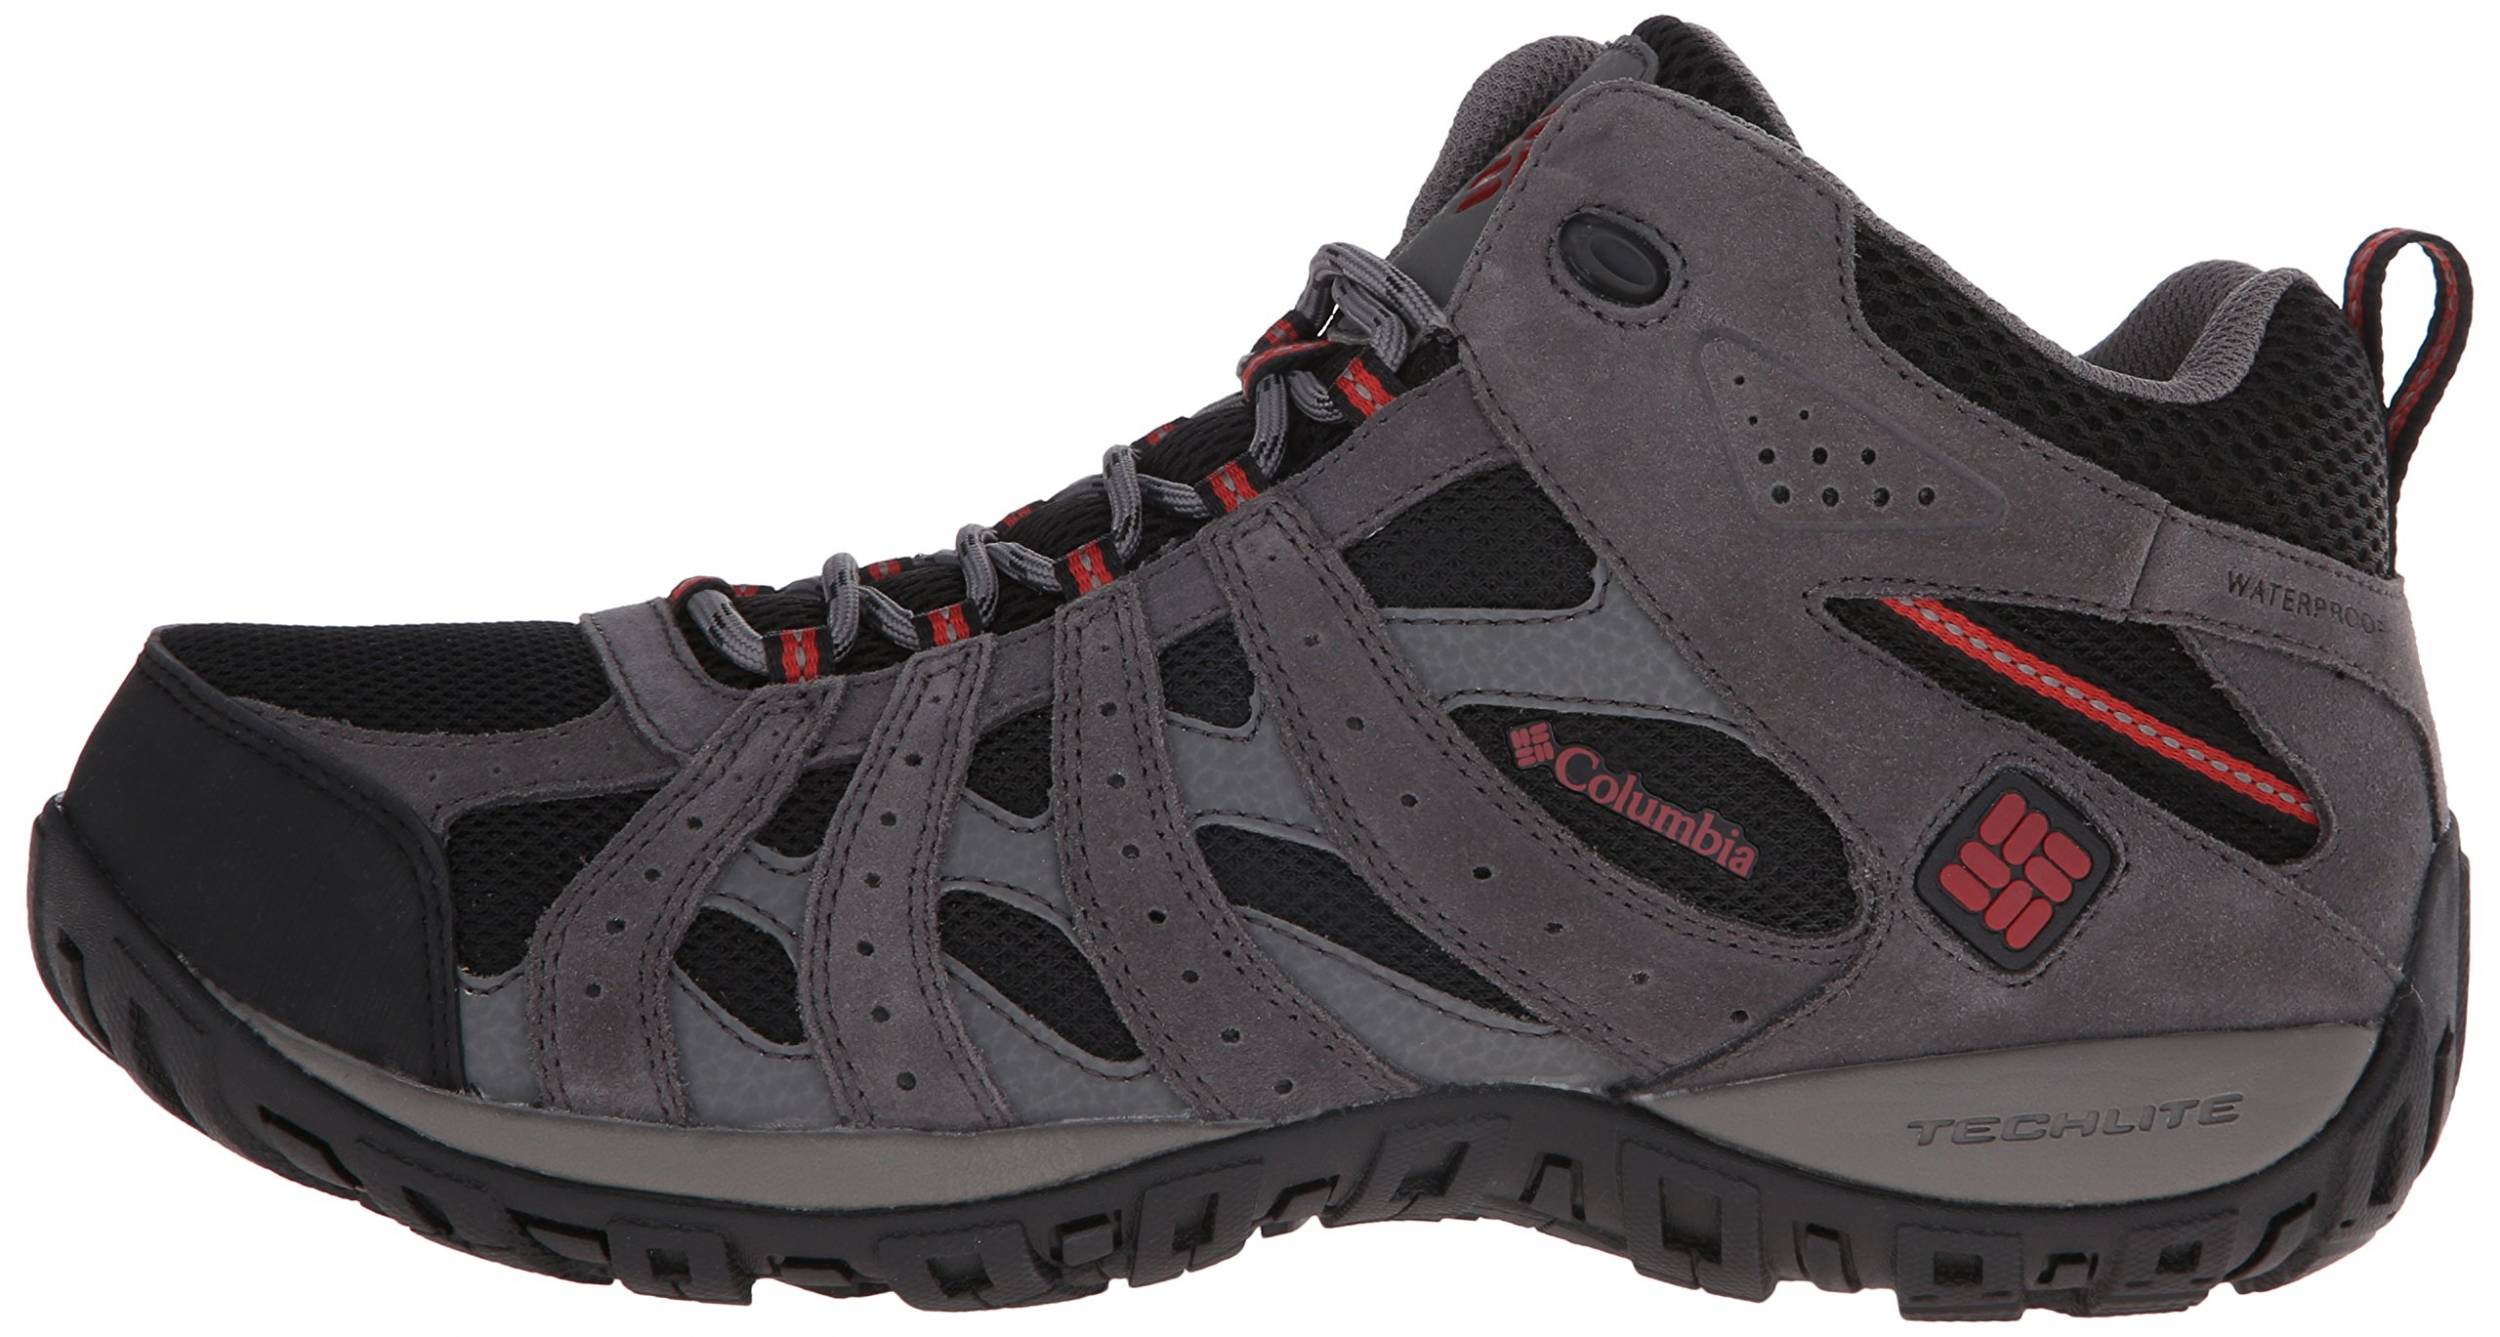 Save 22% on Columbia Hiking Boots (19 